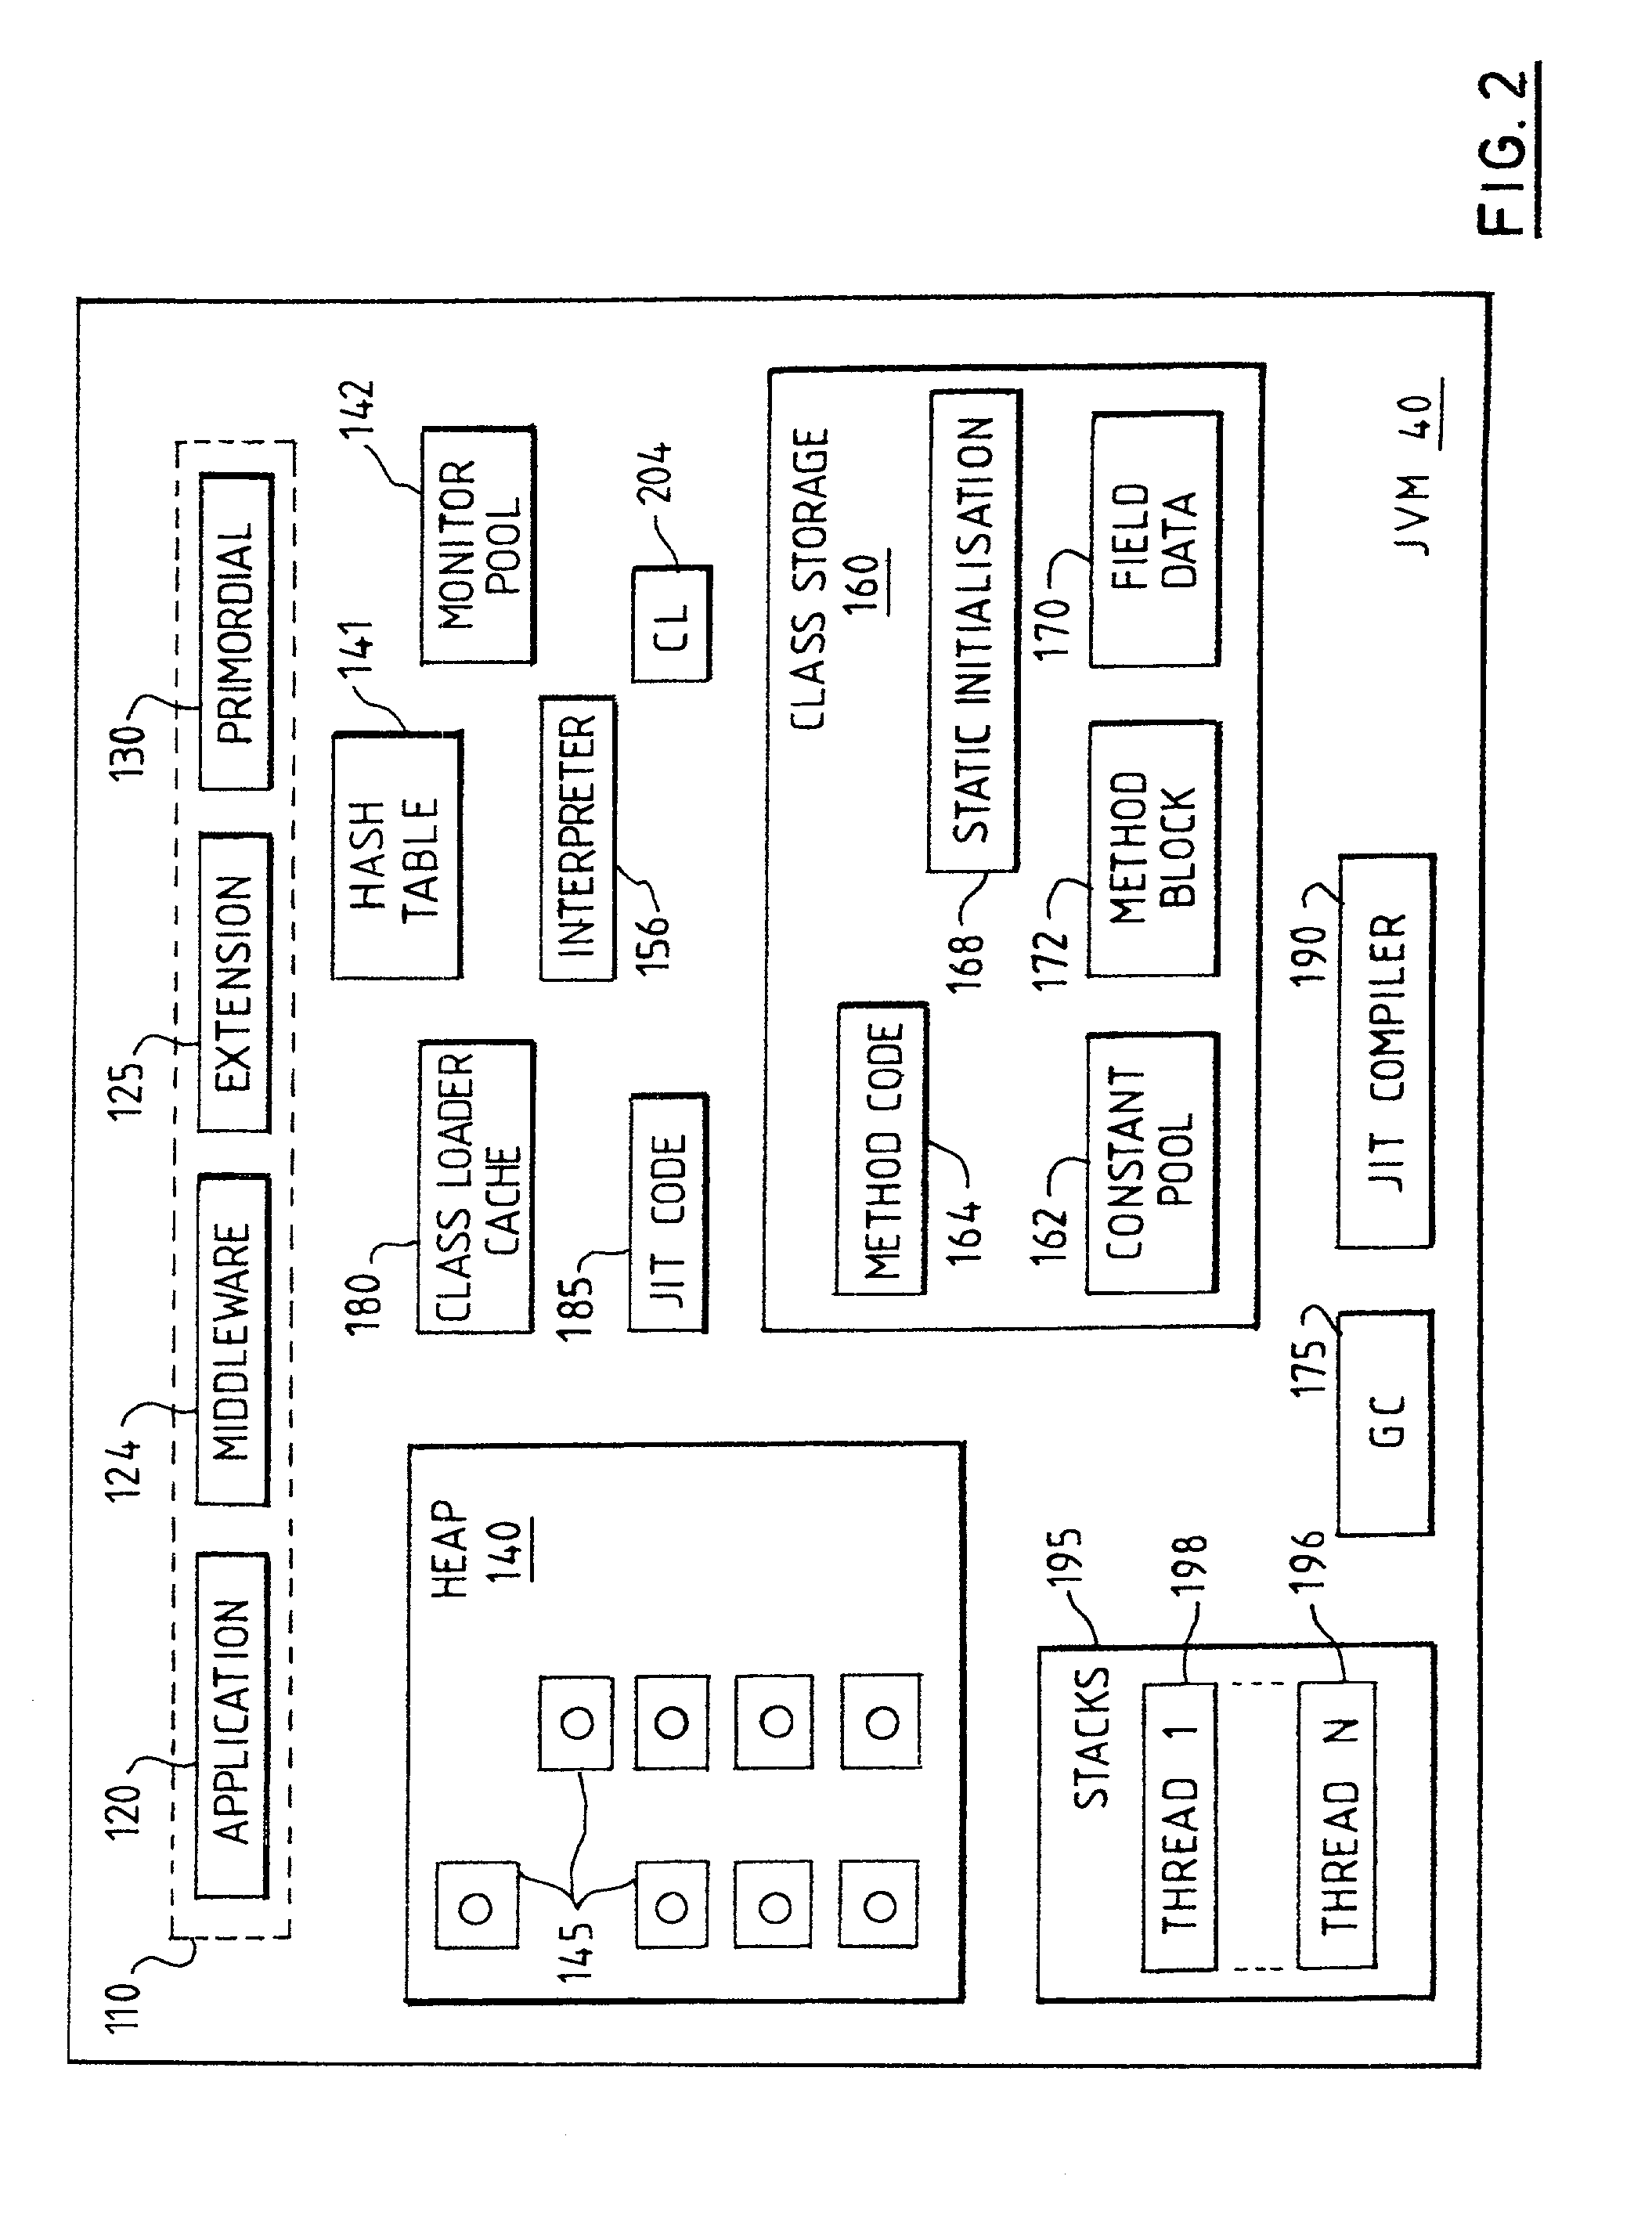 Computer system with heap reset for performing generational garbage collection implemented by card-marking between successive applications